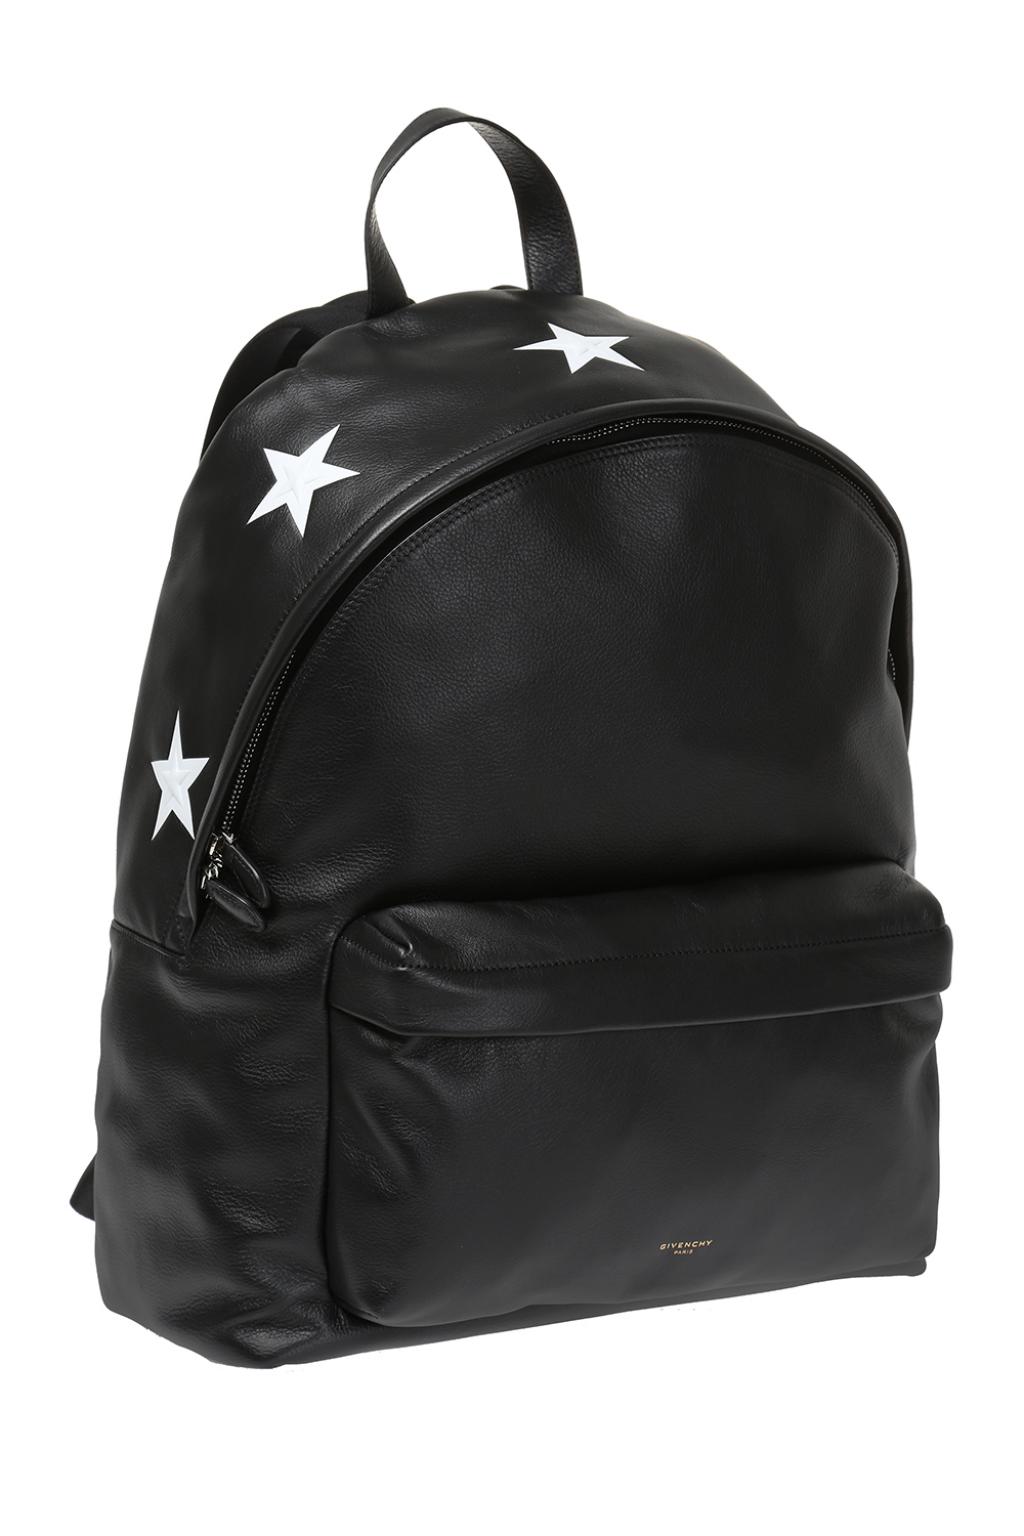 givenchy star backpack